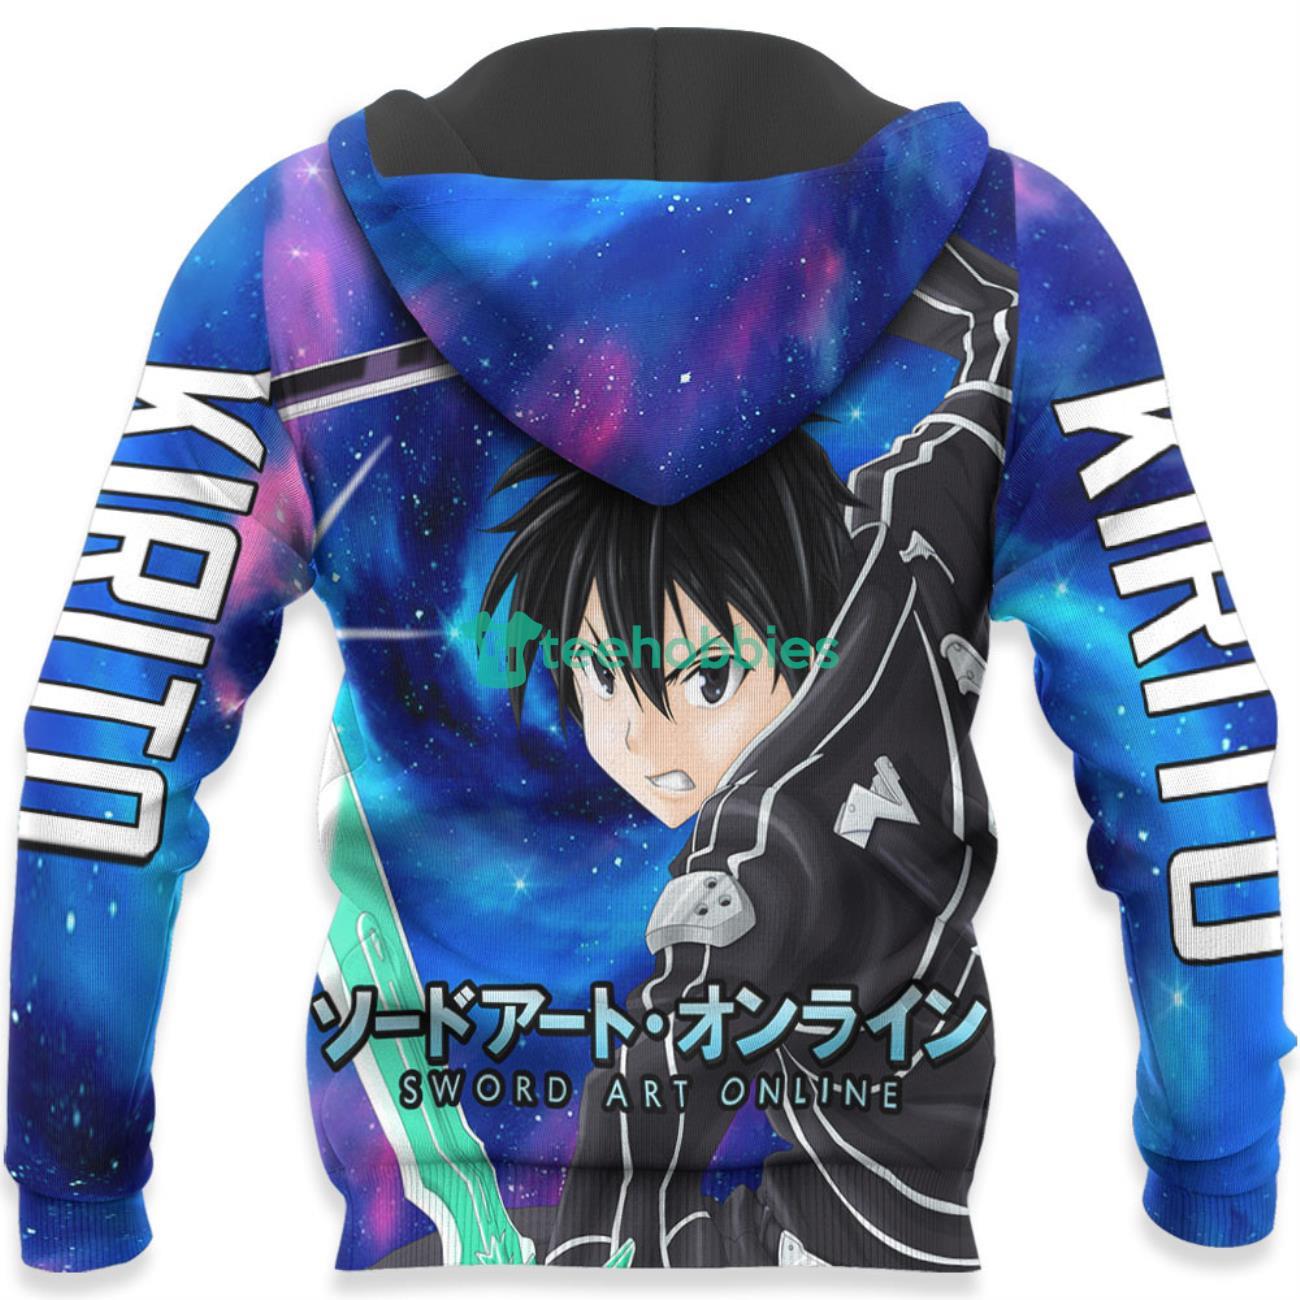 Kirito All Over Printed 3D Shirt Sword Art Online Custom Anime Fans Product Photo 5 Product photo 2